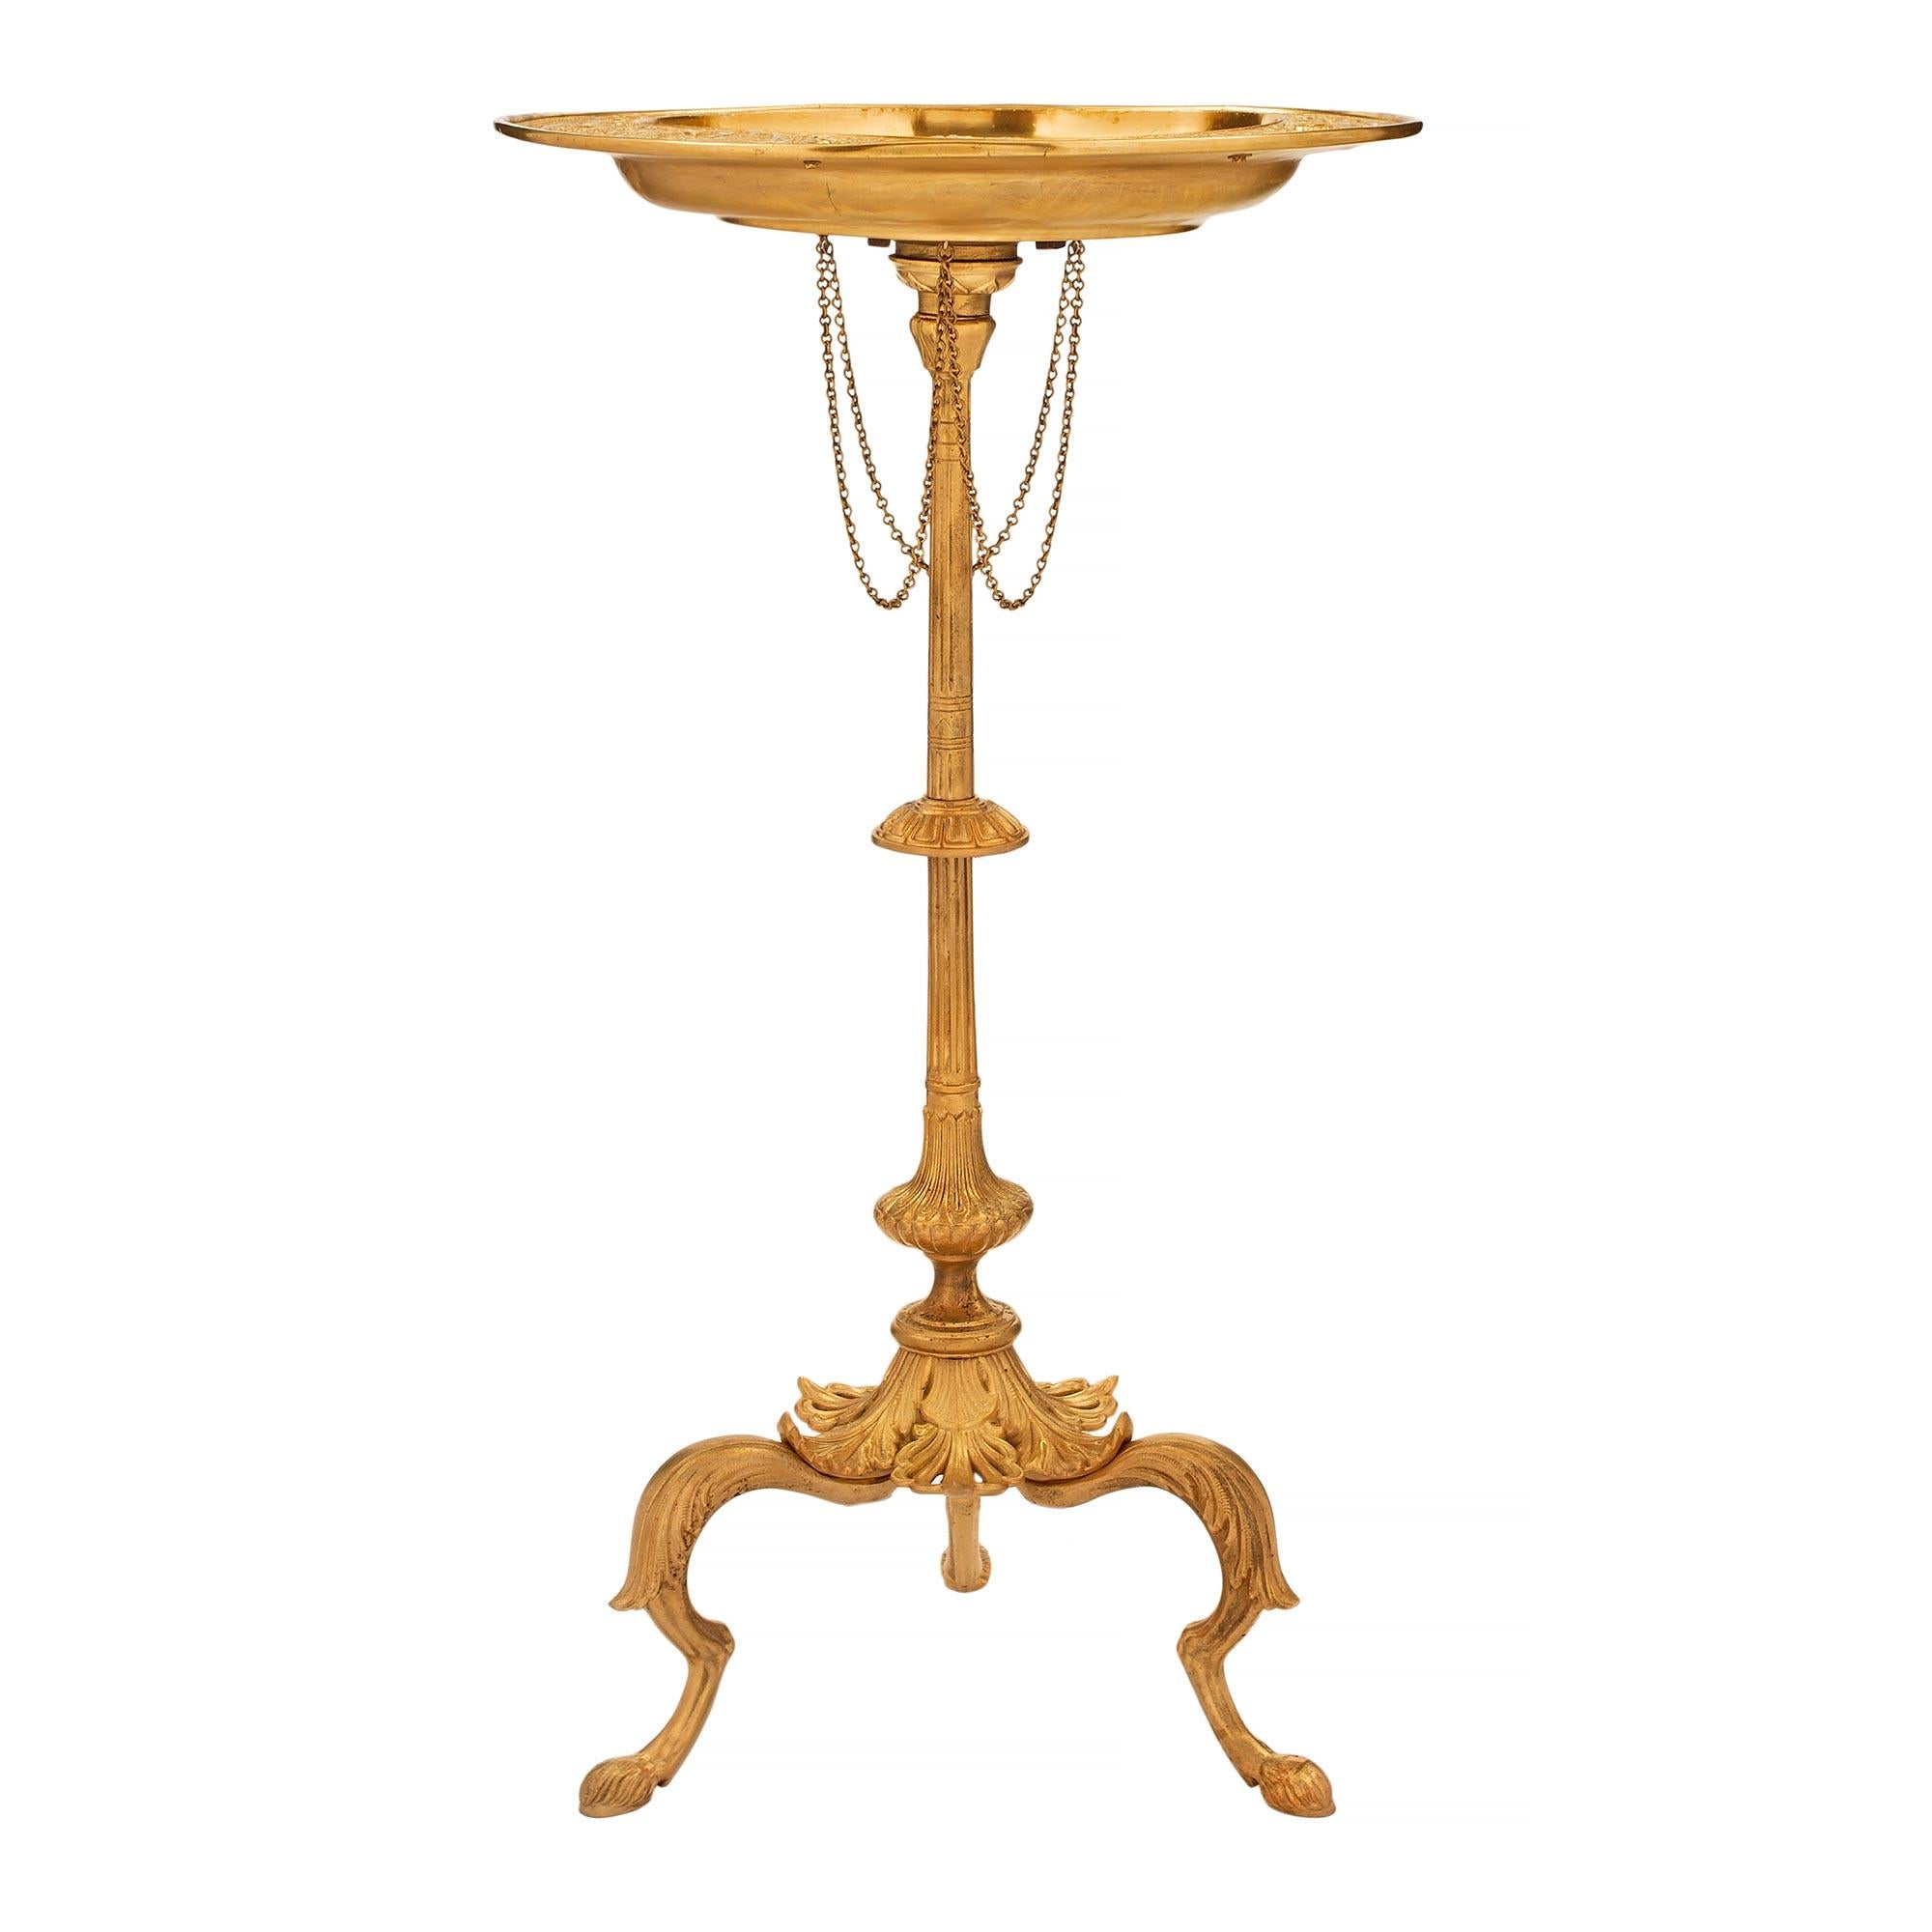 A most decorative Italian 19th century neo-classical st. ormolu side table, after a model by François Briot's, Temperantia, Temperance Dish. The table is raised by three scrolled supports with beautiful hoof feet and foliate designs. The central